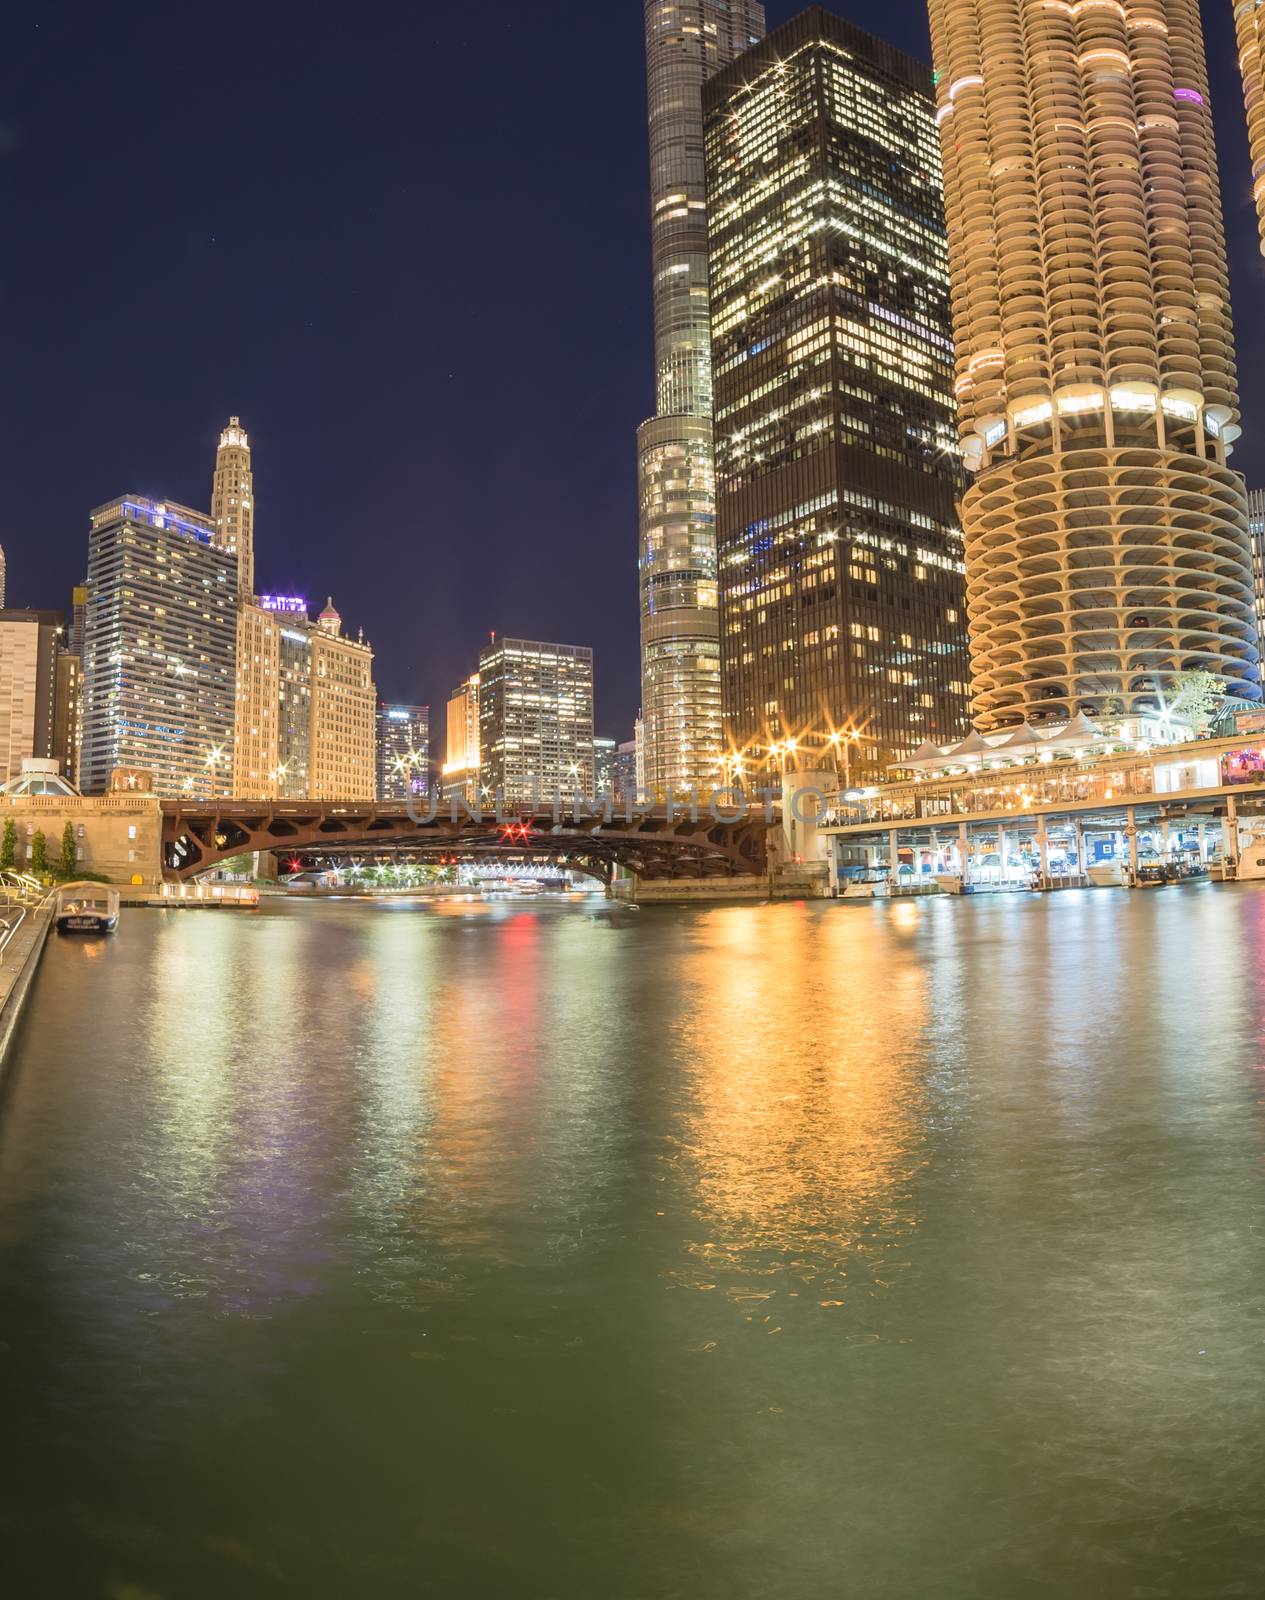 View from large fishing pier on Marina Cove toward riverside Chicago skylines and State Street at blue hour